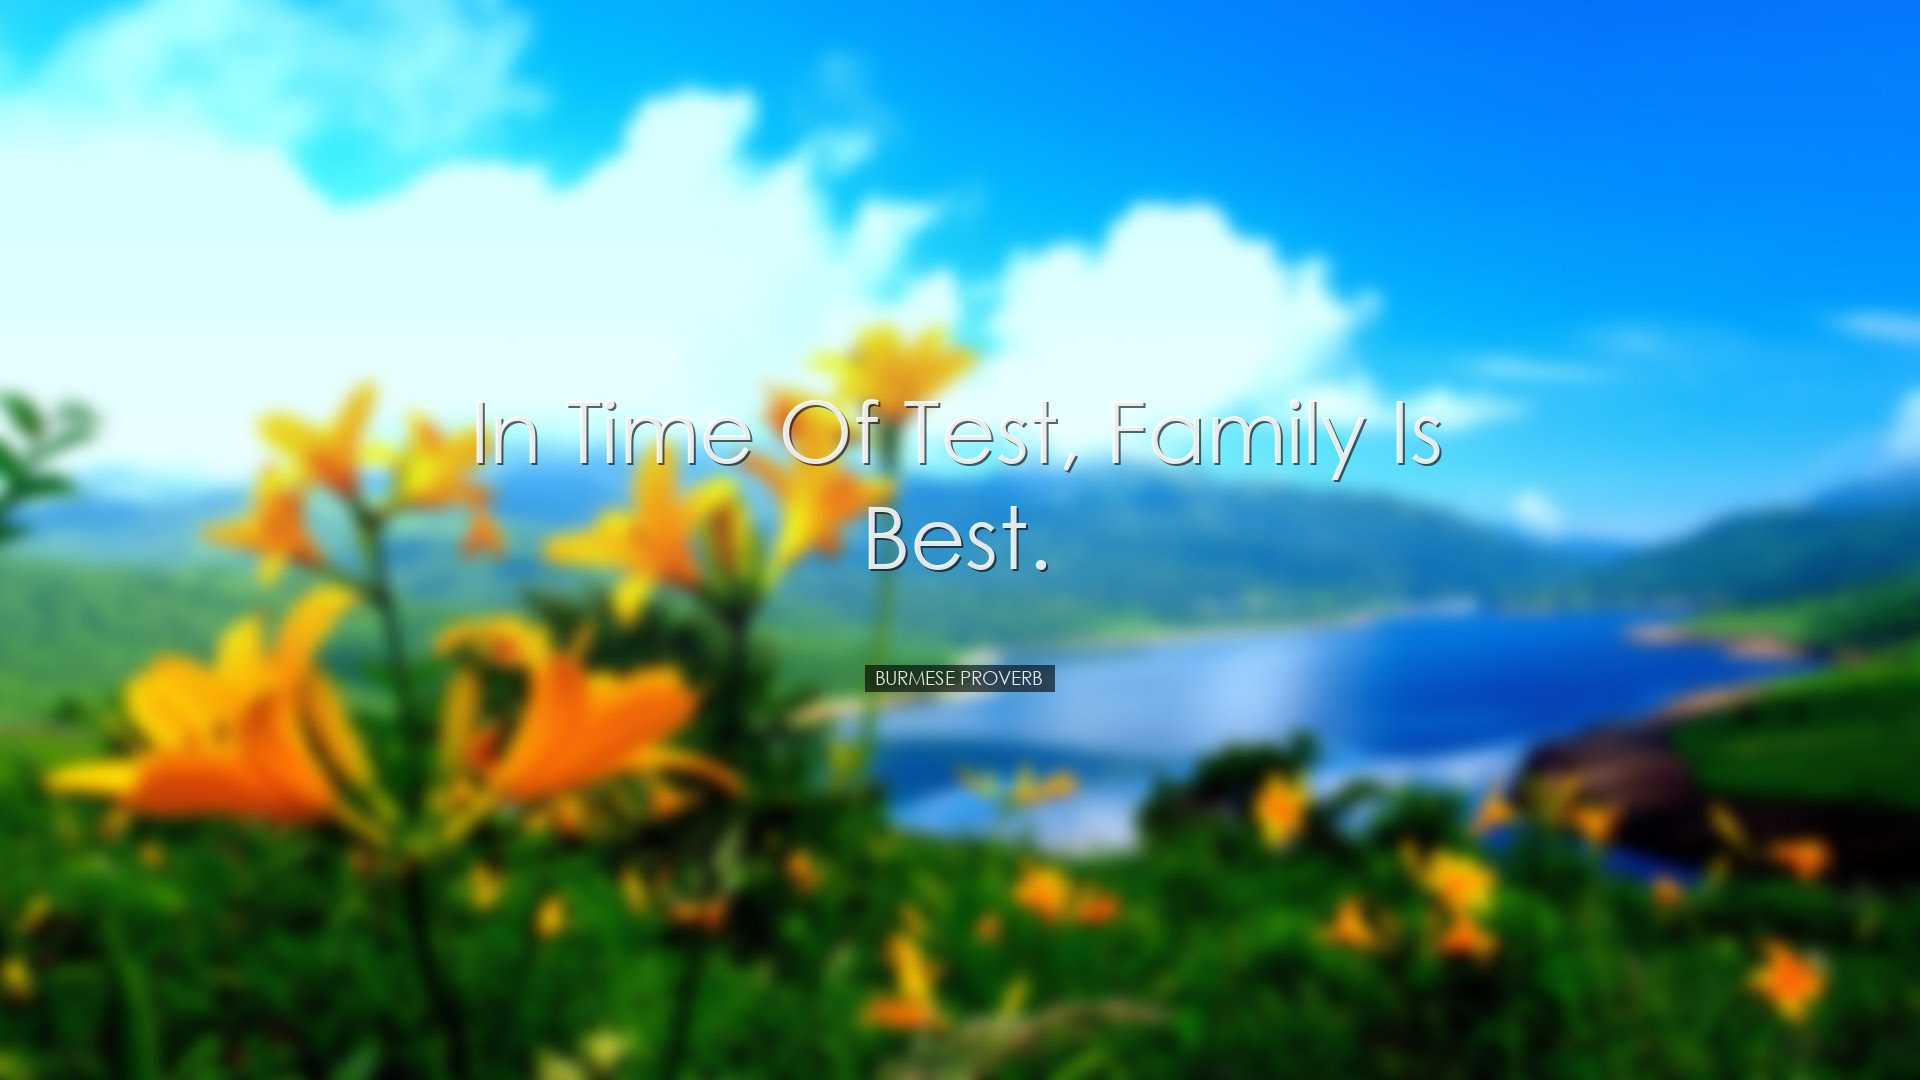 In time of test, family is best. - Burmese Proverb